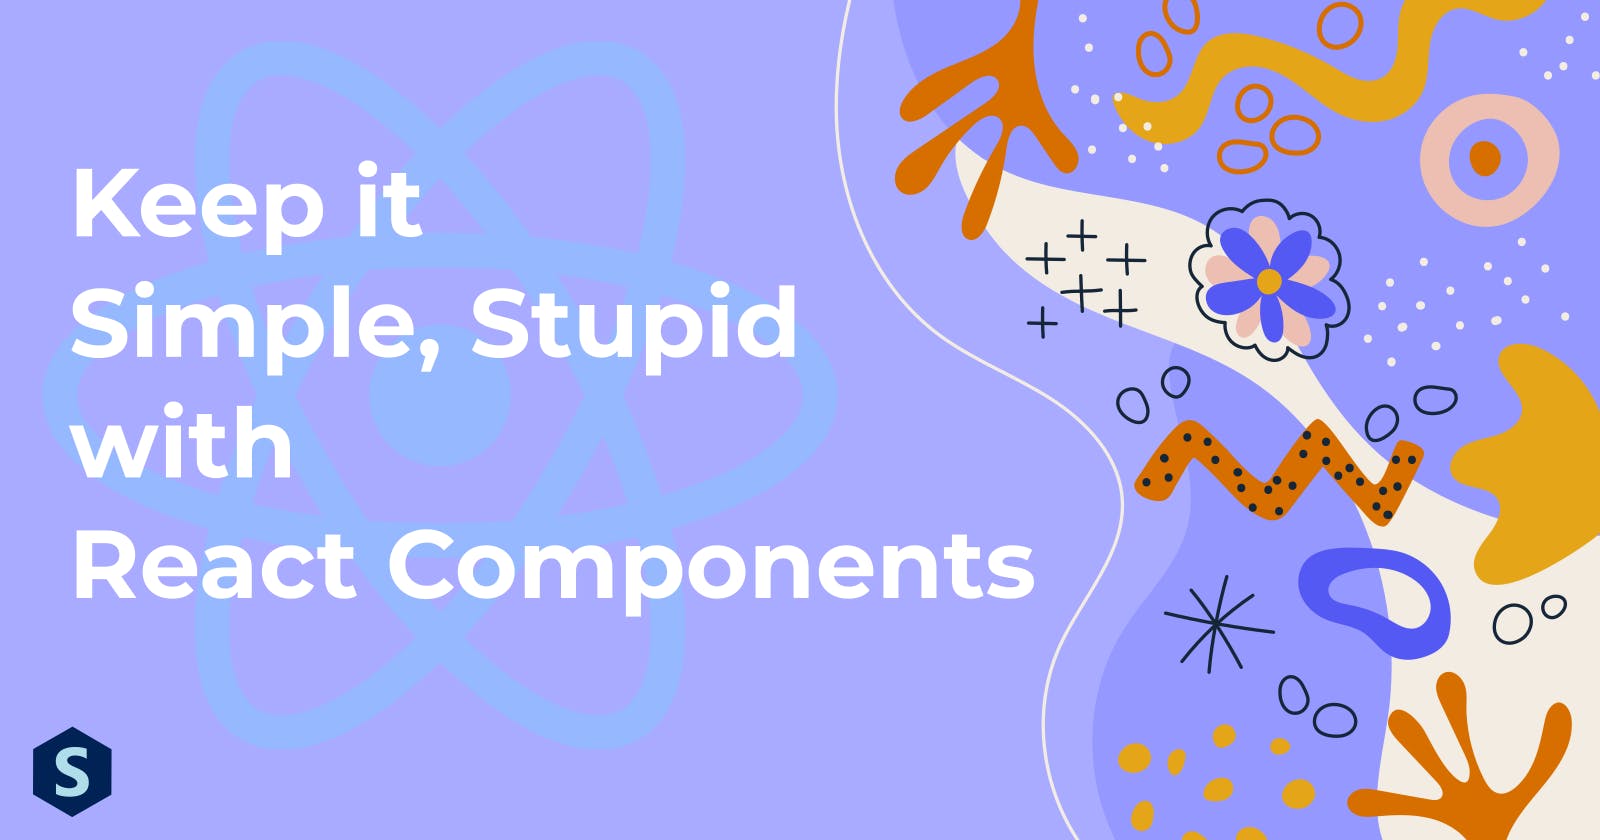 Keep it Simple, Stupid with React Components